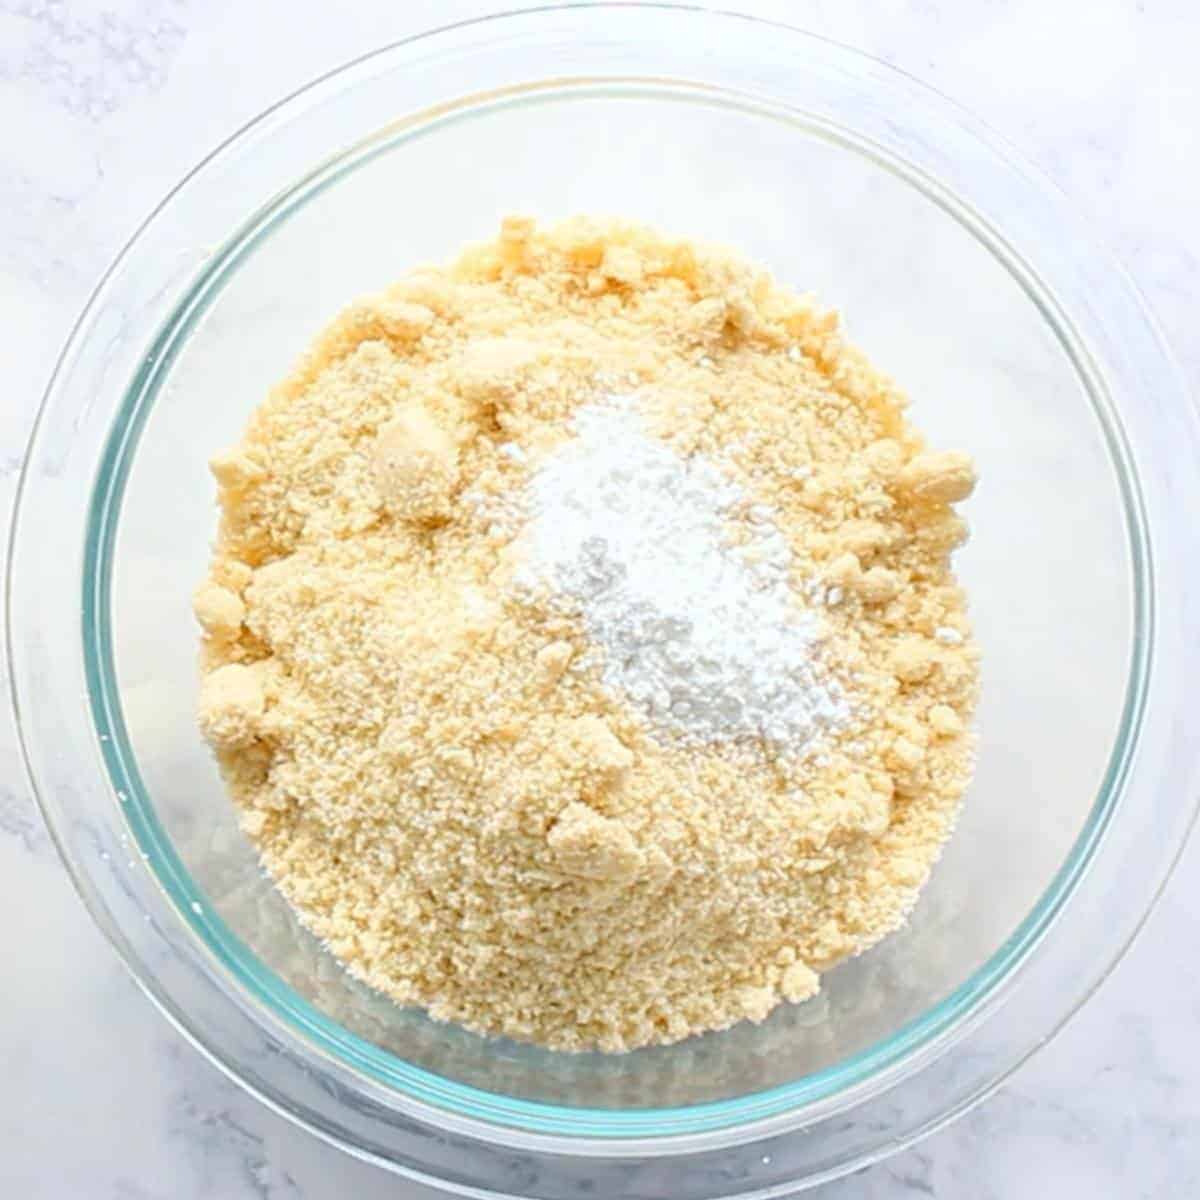 almond flour and baking powder in glass mixing bowl.